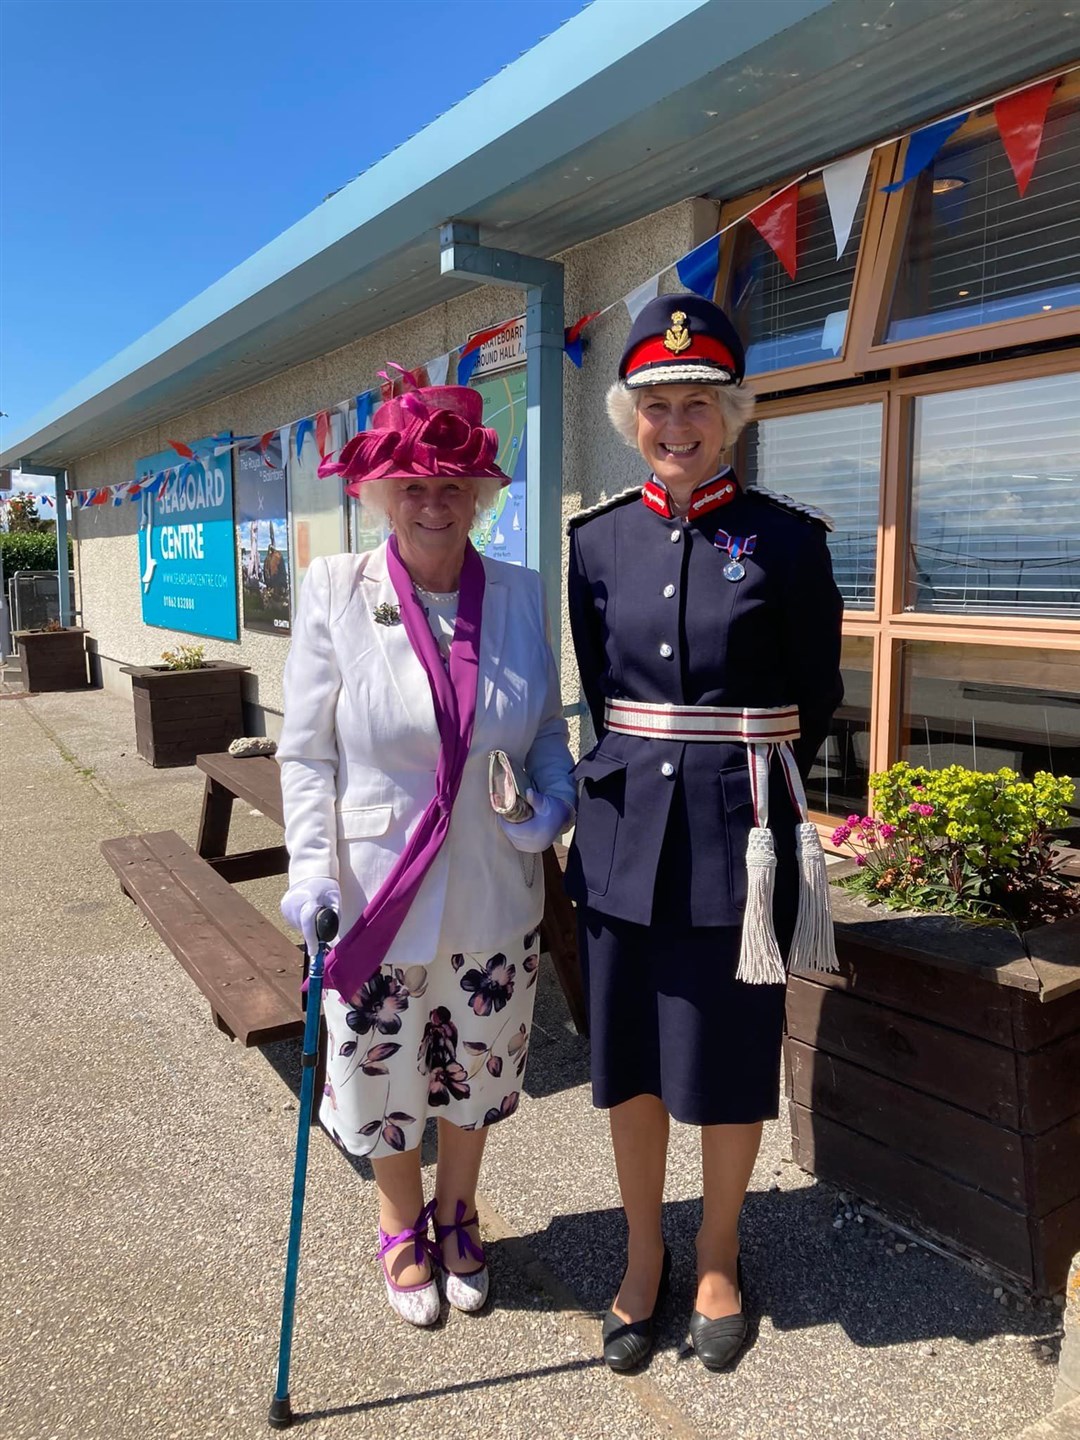 Lord Lieutenant Joanie Whiteford dropped in to join the celebrations.